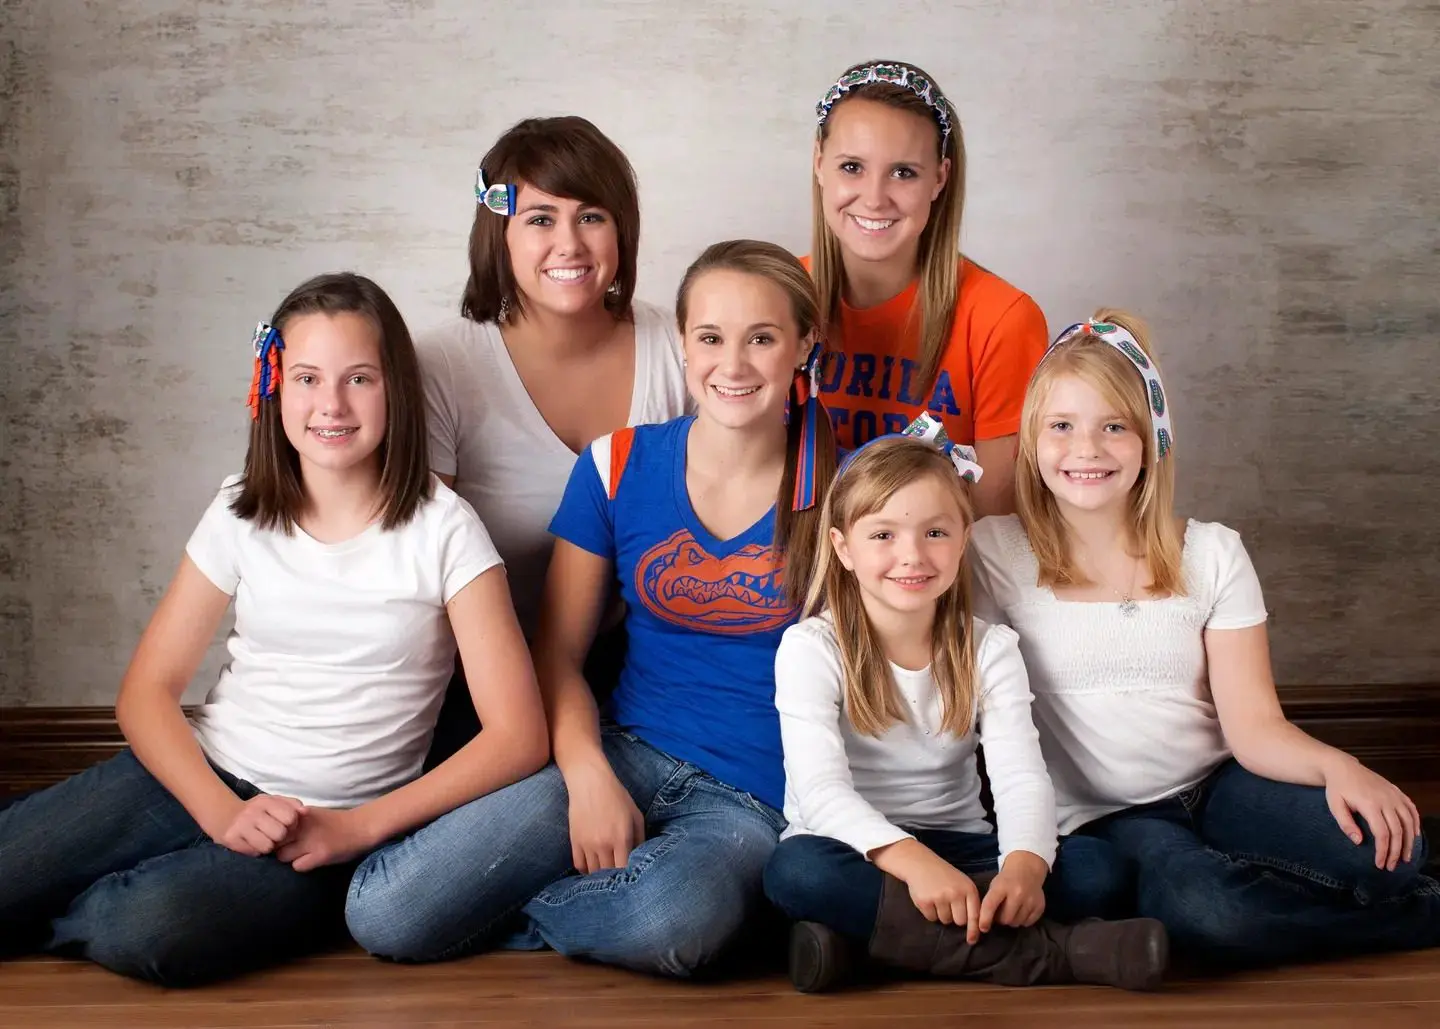 A group of girls posing for a family photo.